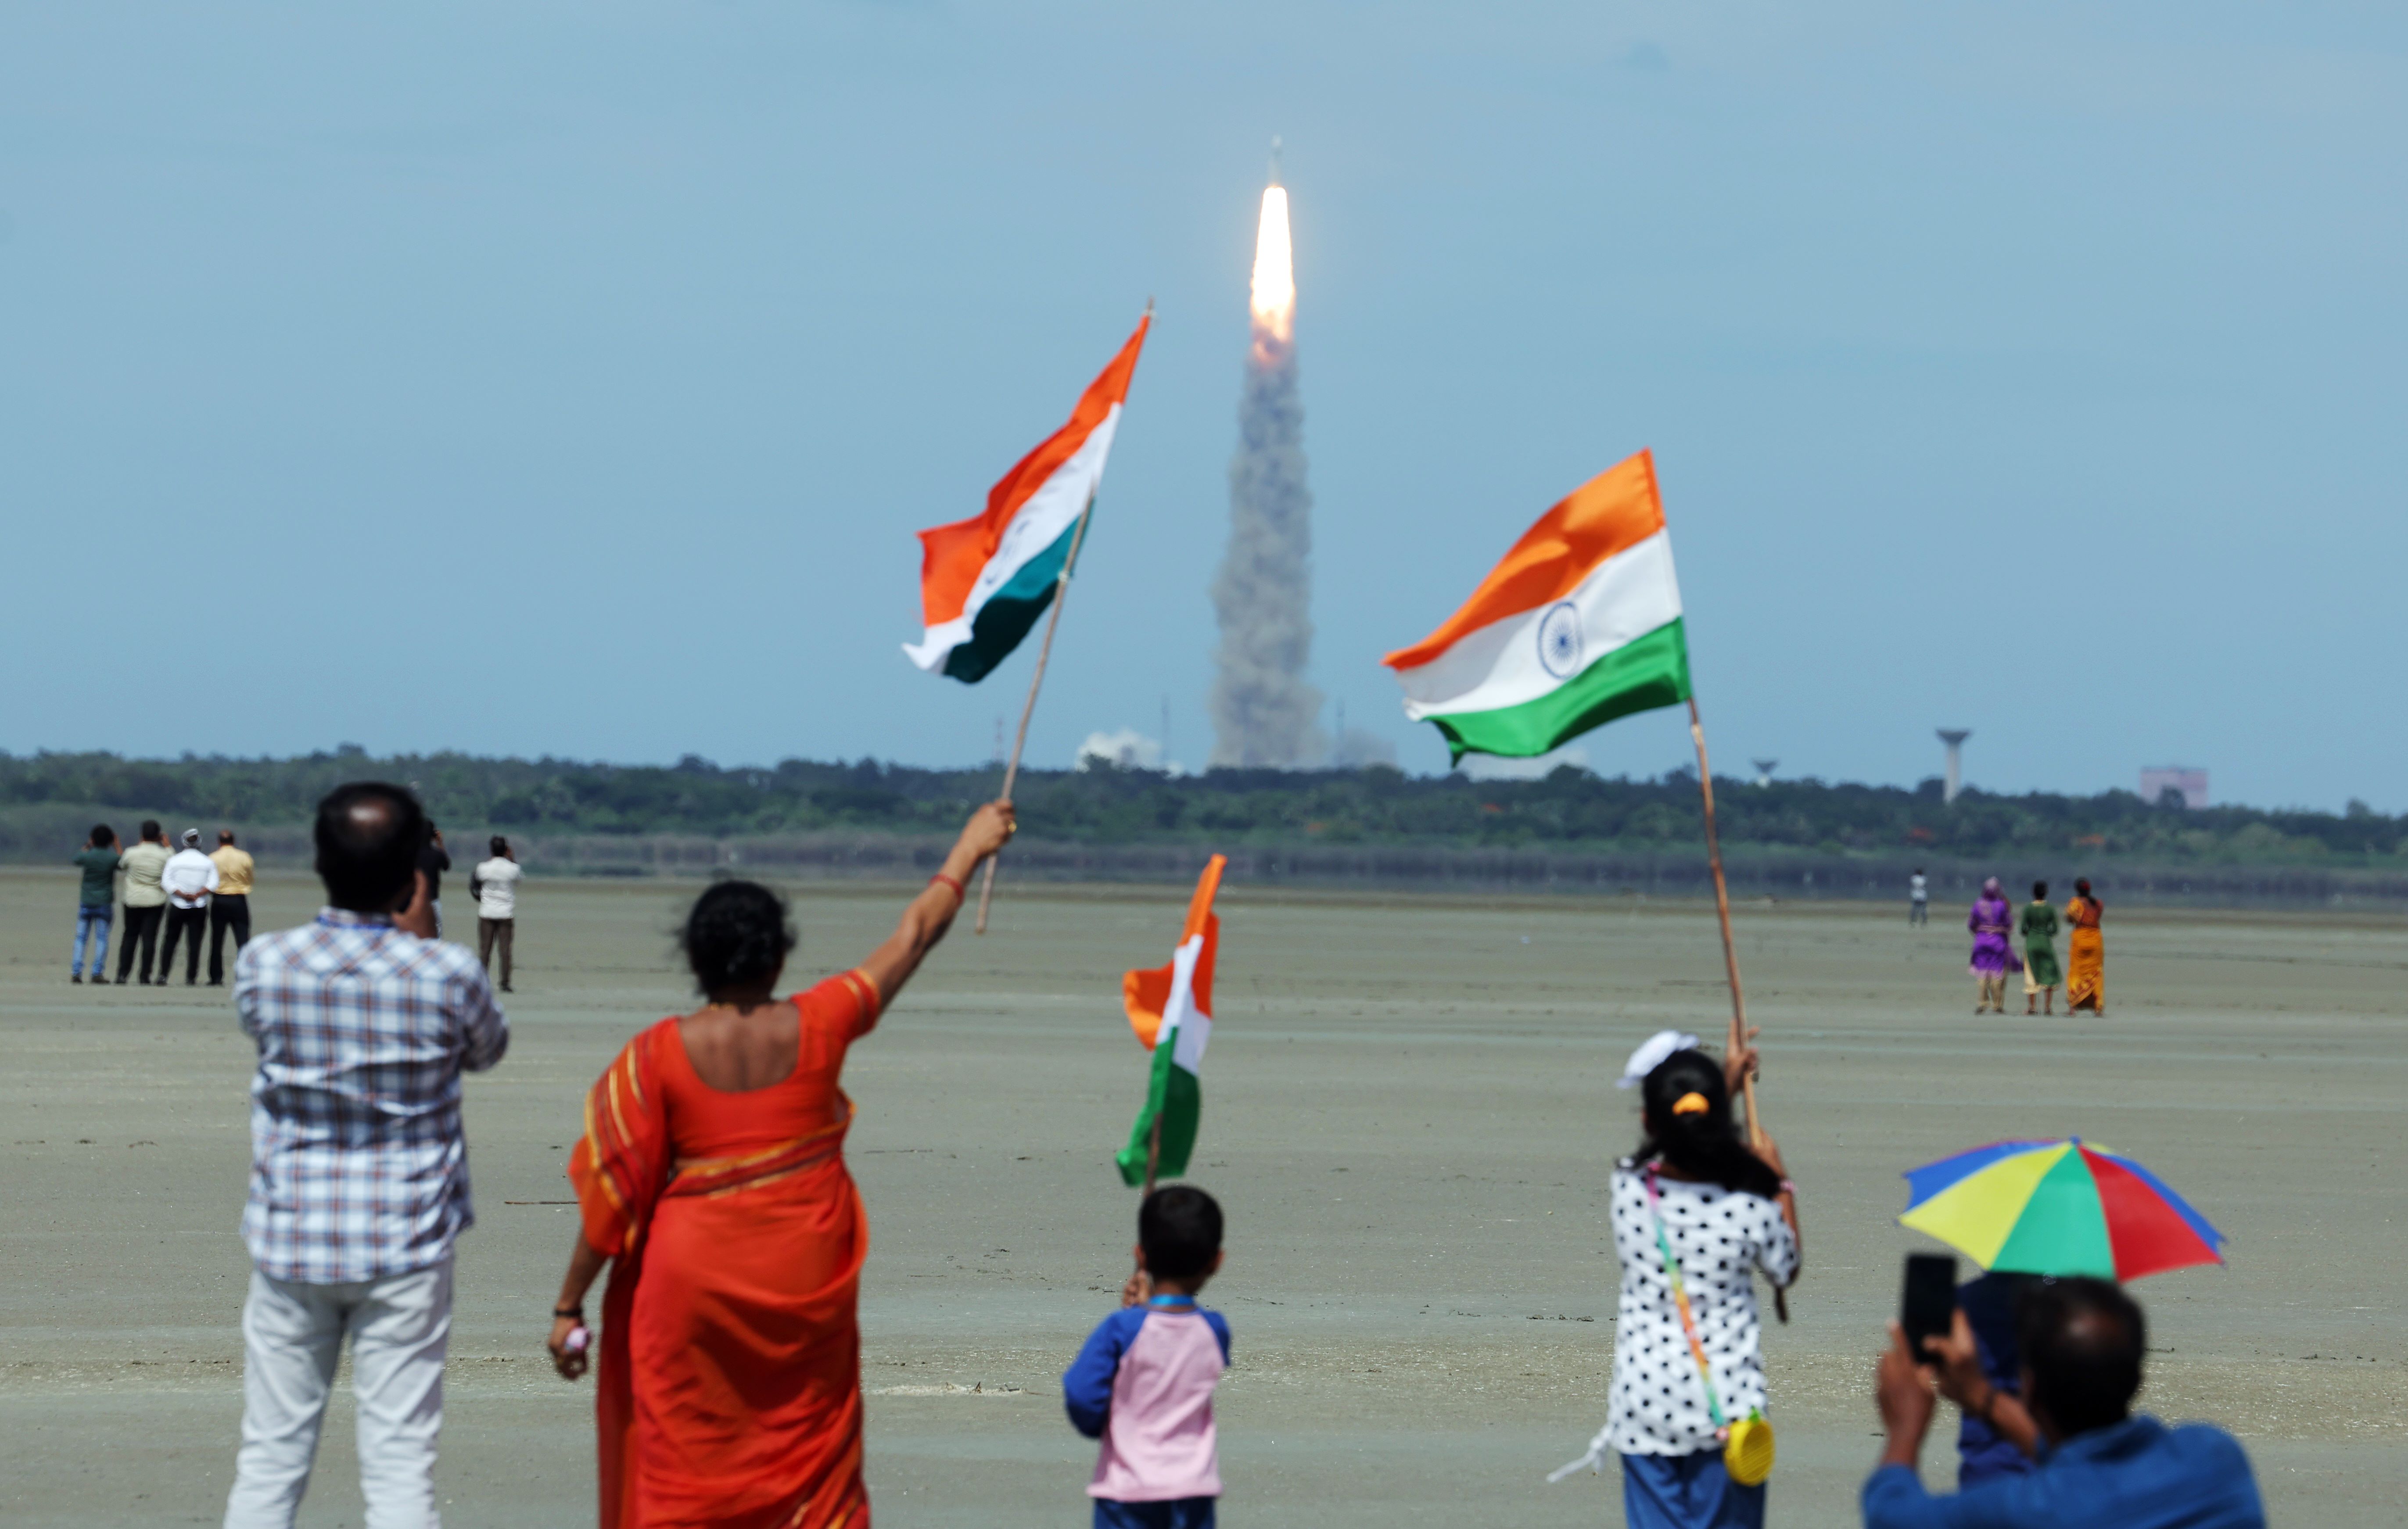 Congratulations from abroad and cheers across the country as India’s lander heads to Moon